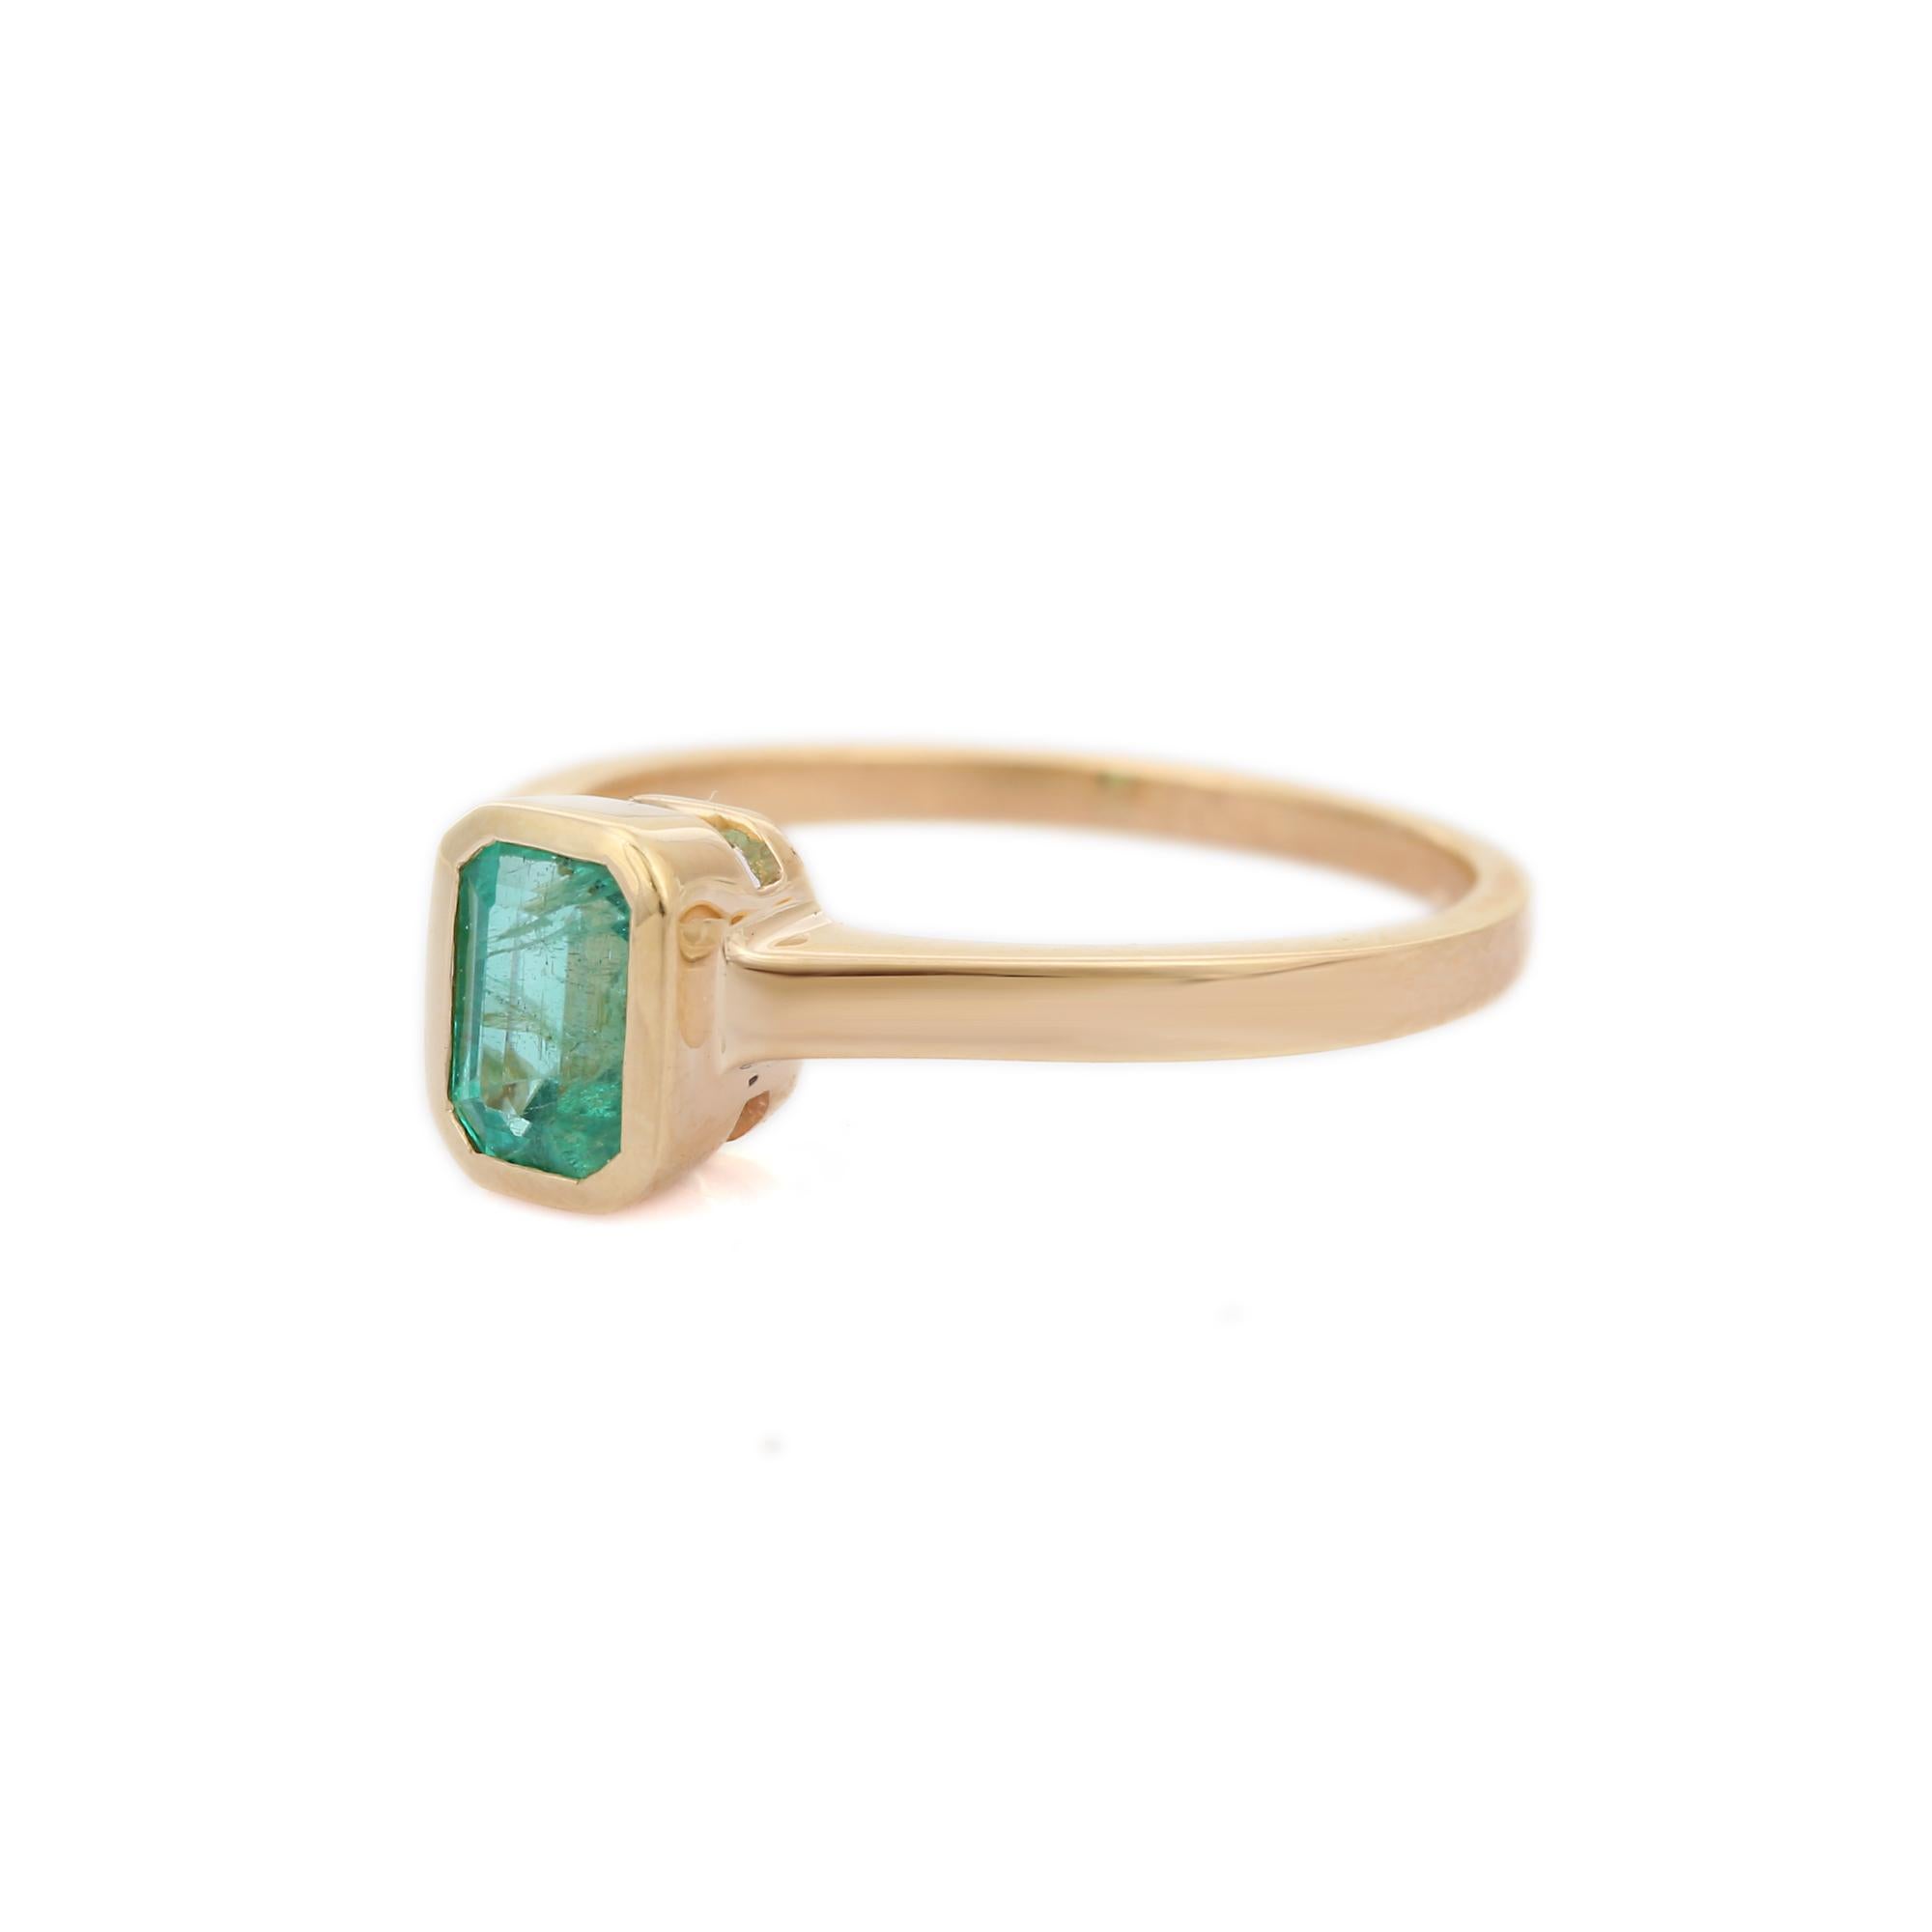 For Sale:  Handmade Bezel Set Emerald Single Stone Ring in 14k Solid Yellow Gold 3